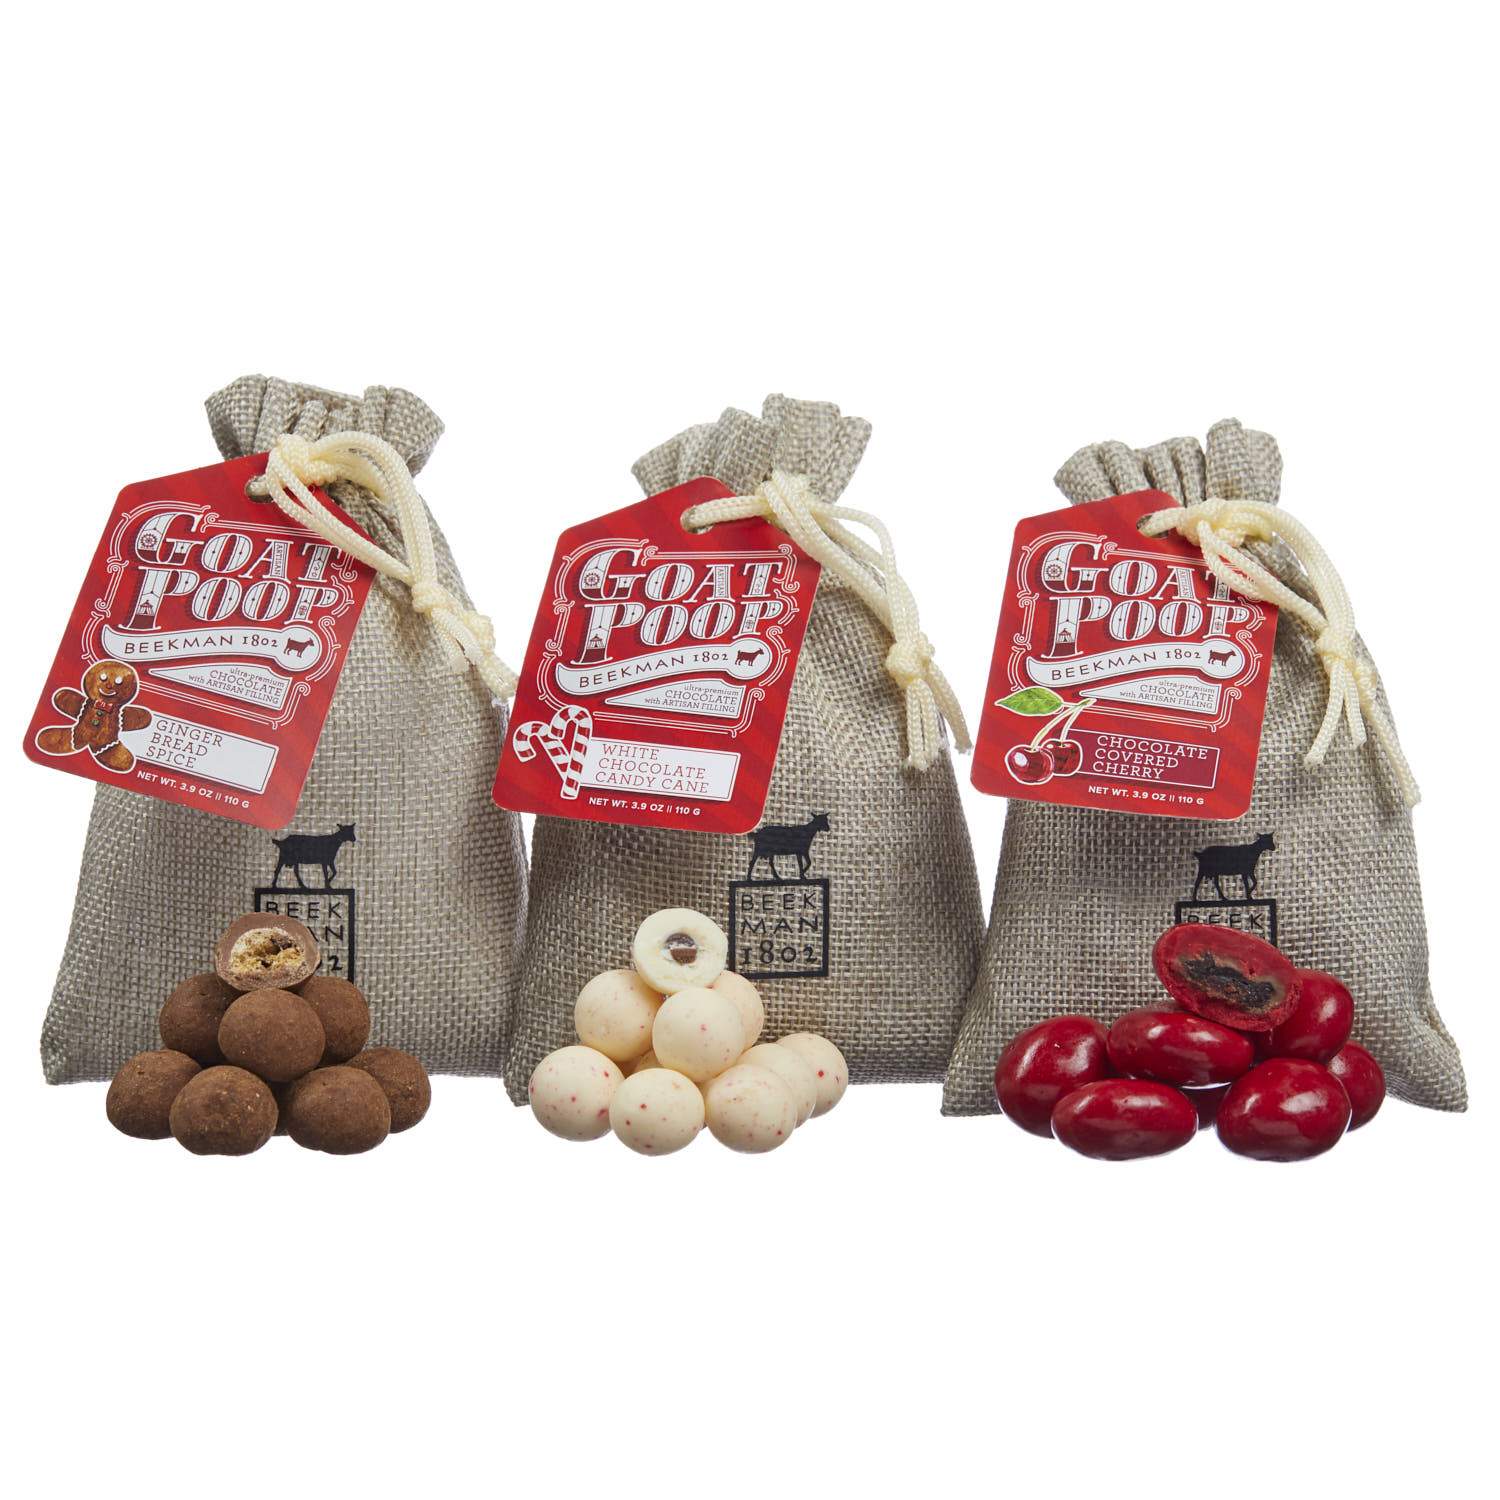 Goat Poop 3-pack with Special Edition Holiday Flavors